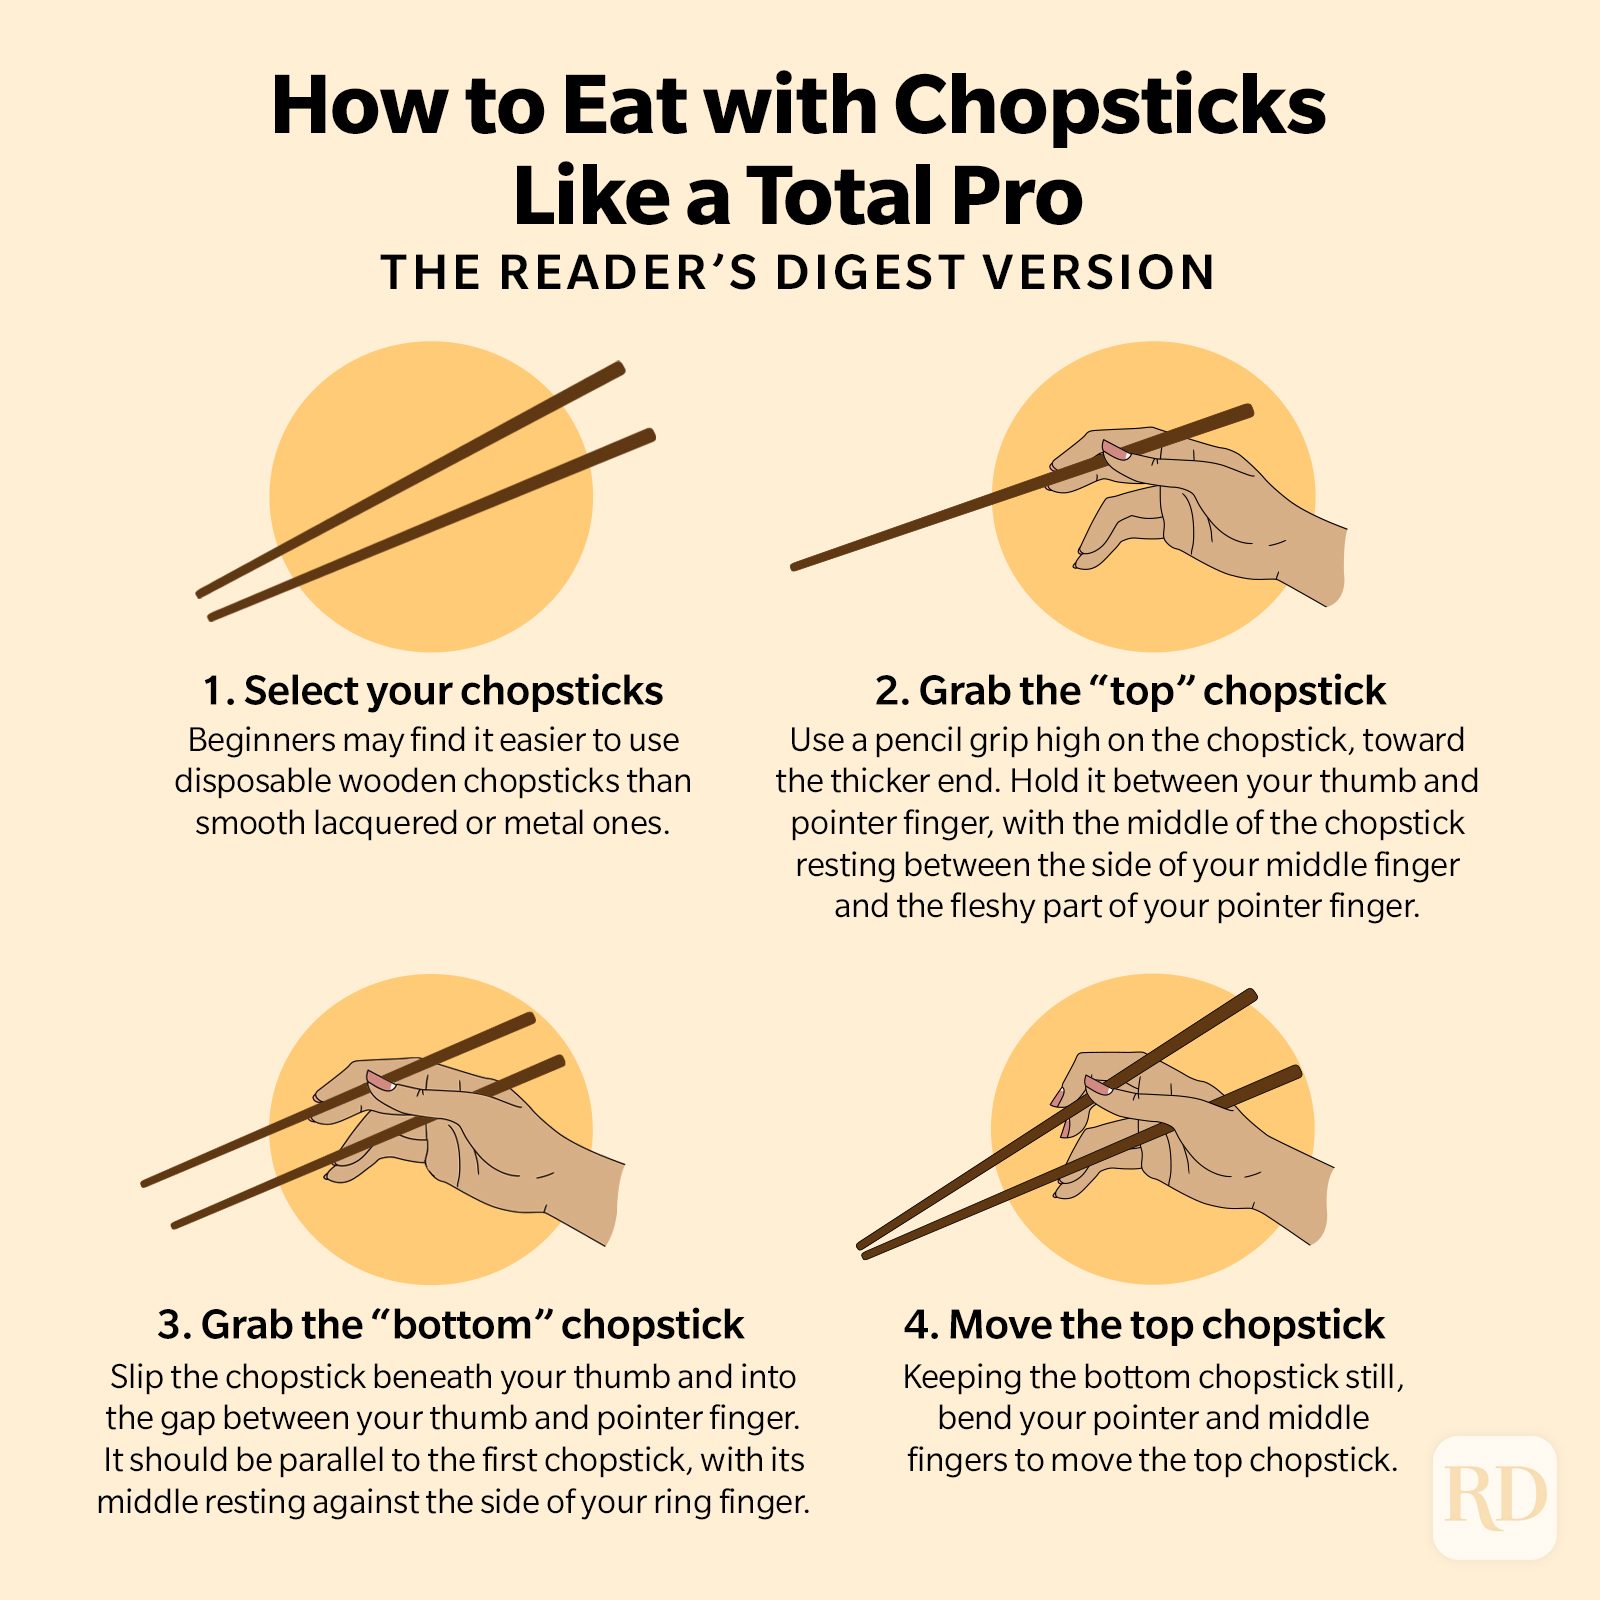 How To Eat With Chopsticks Like An Absolute Pro infographic